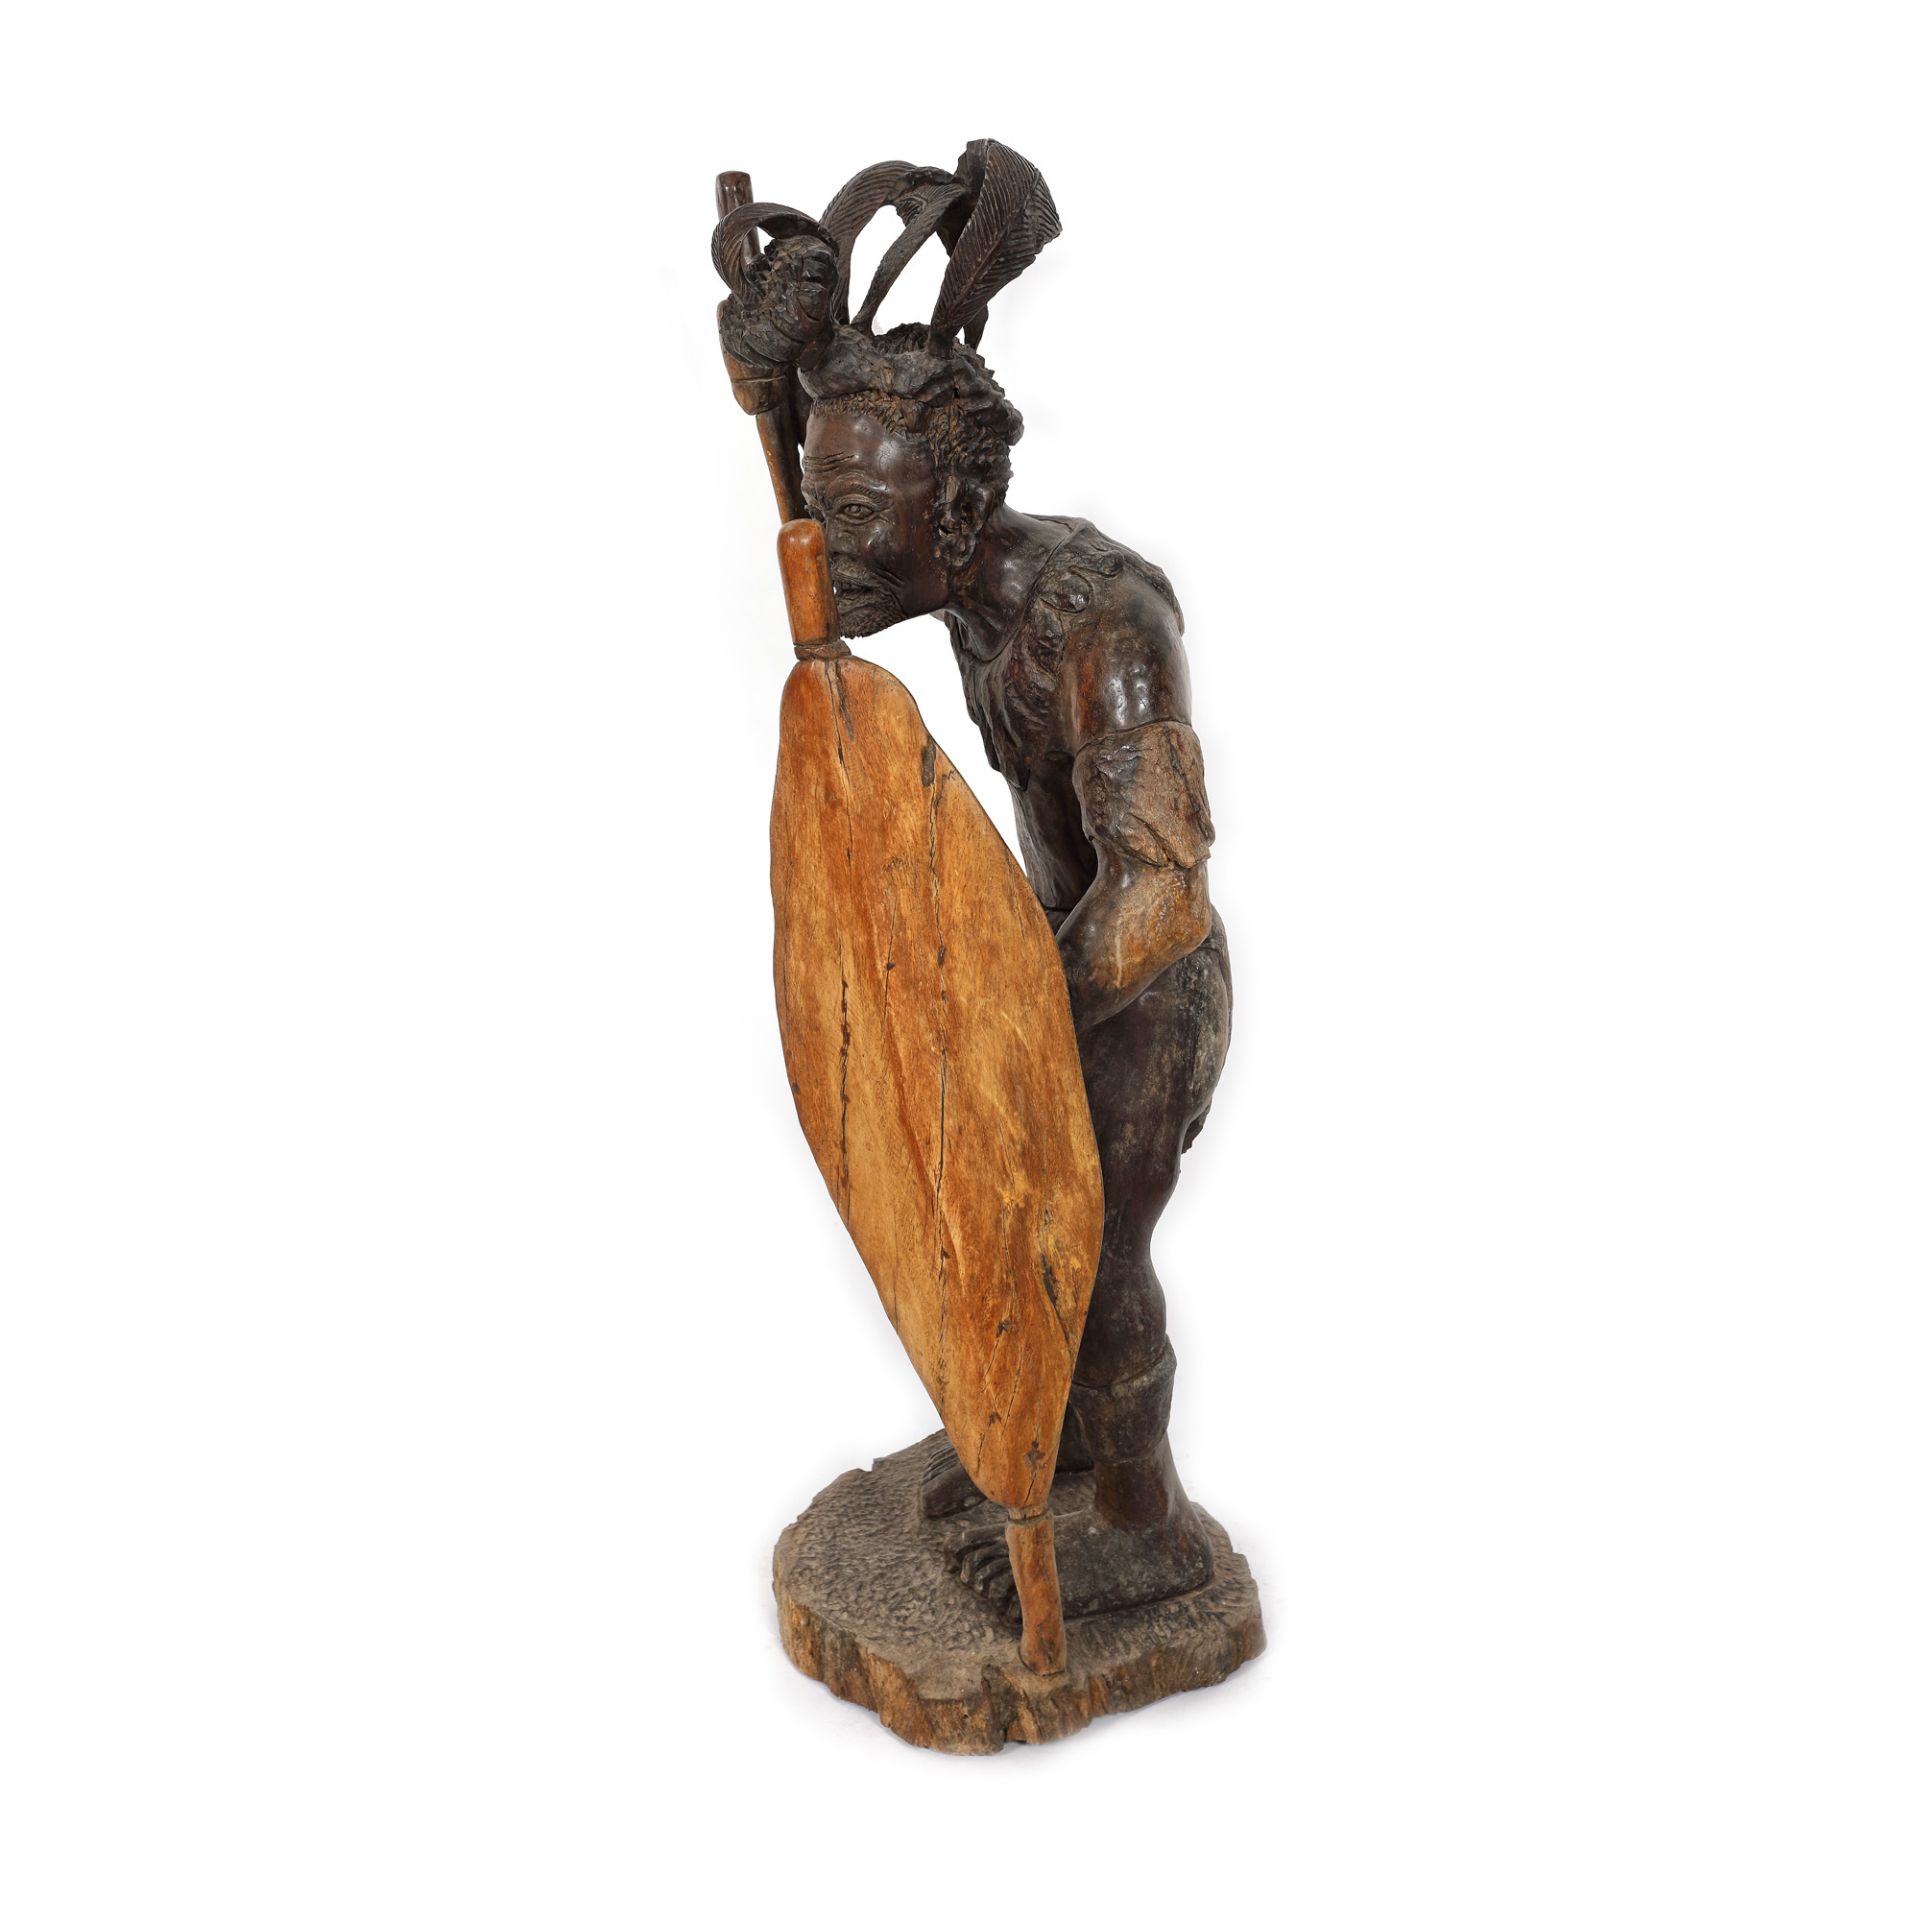 Decorative statuette depicting an aboriginal, middle 20th century - Image 2 of 3